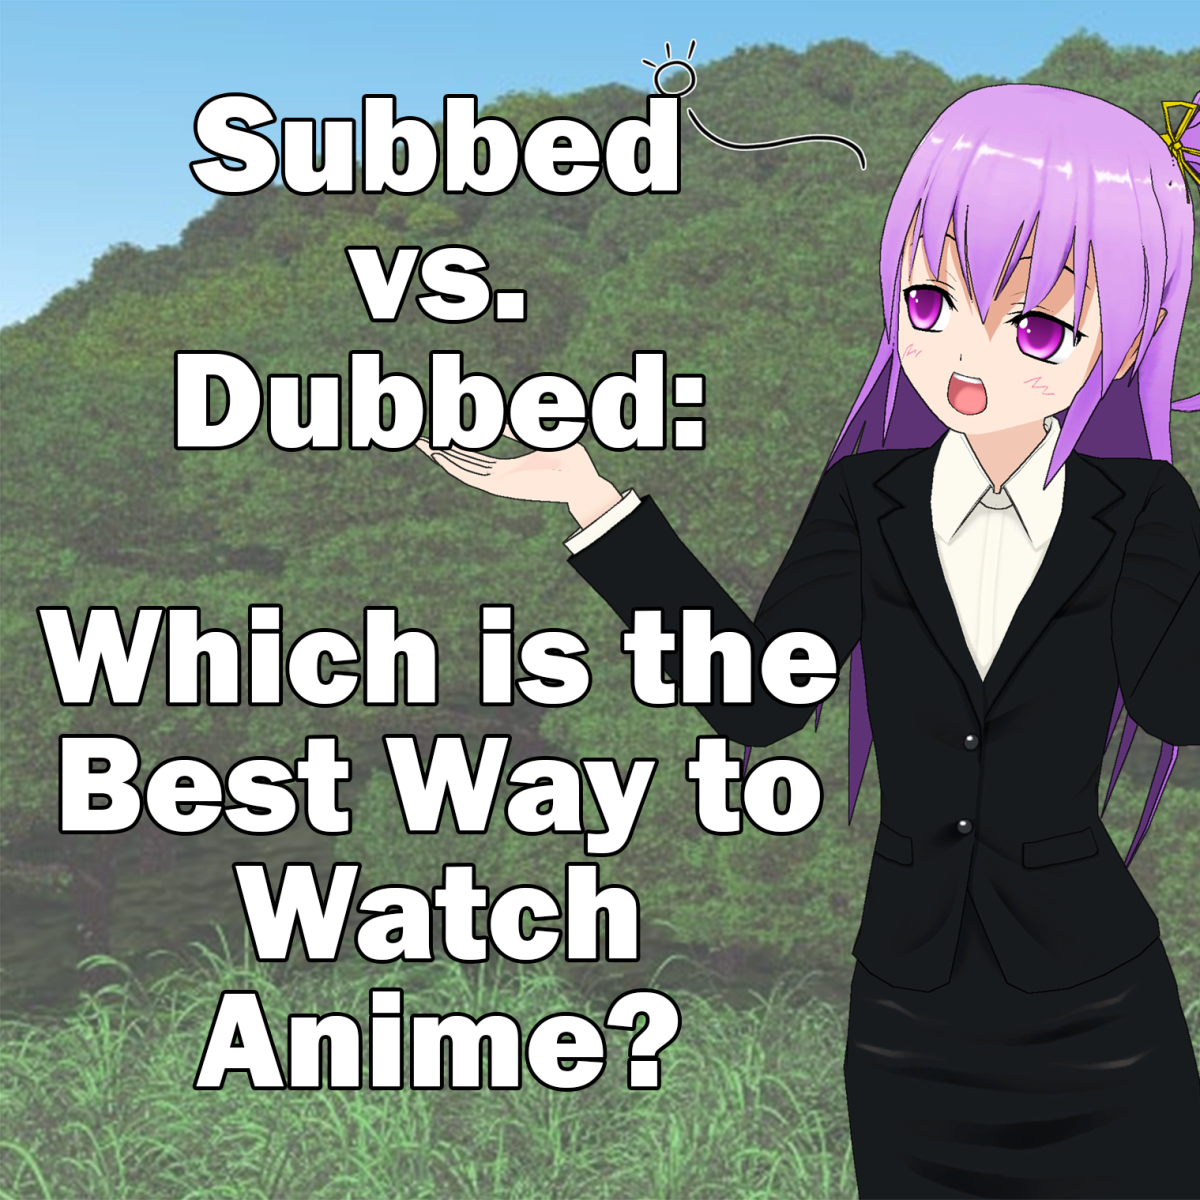 Subbed vs. Dubbed: Which Is the Best Way to Watch Anime?